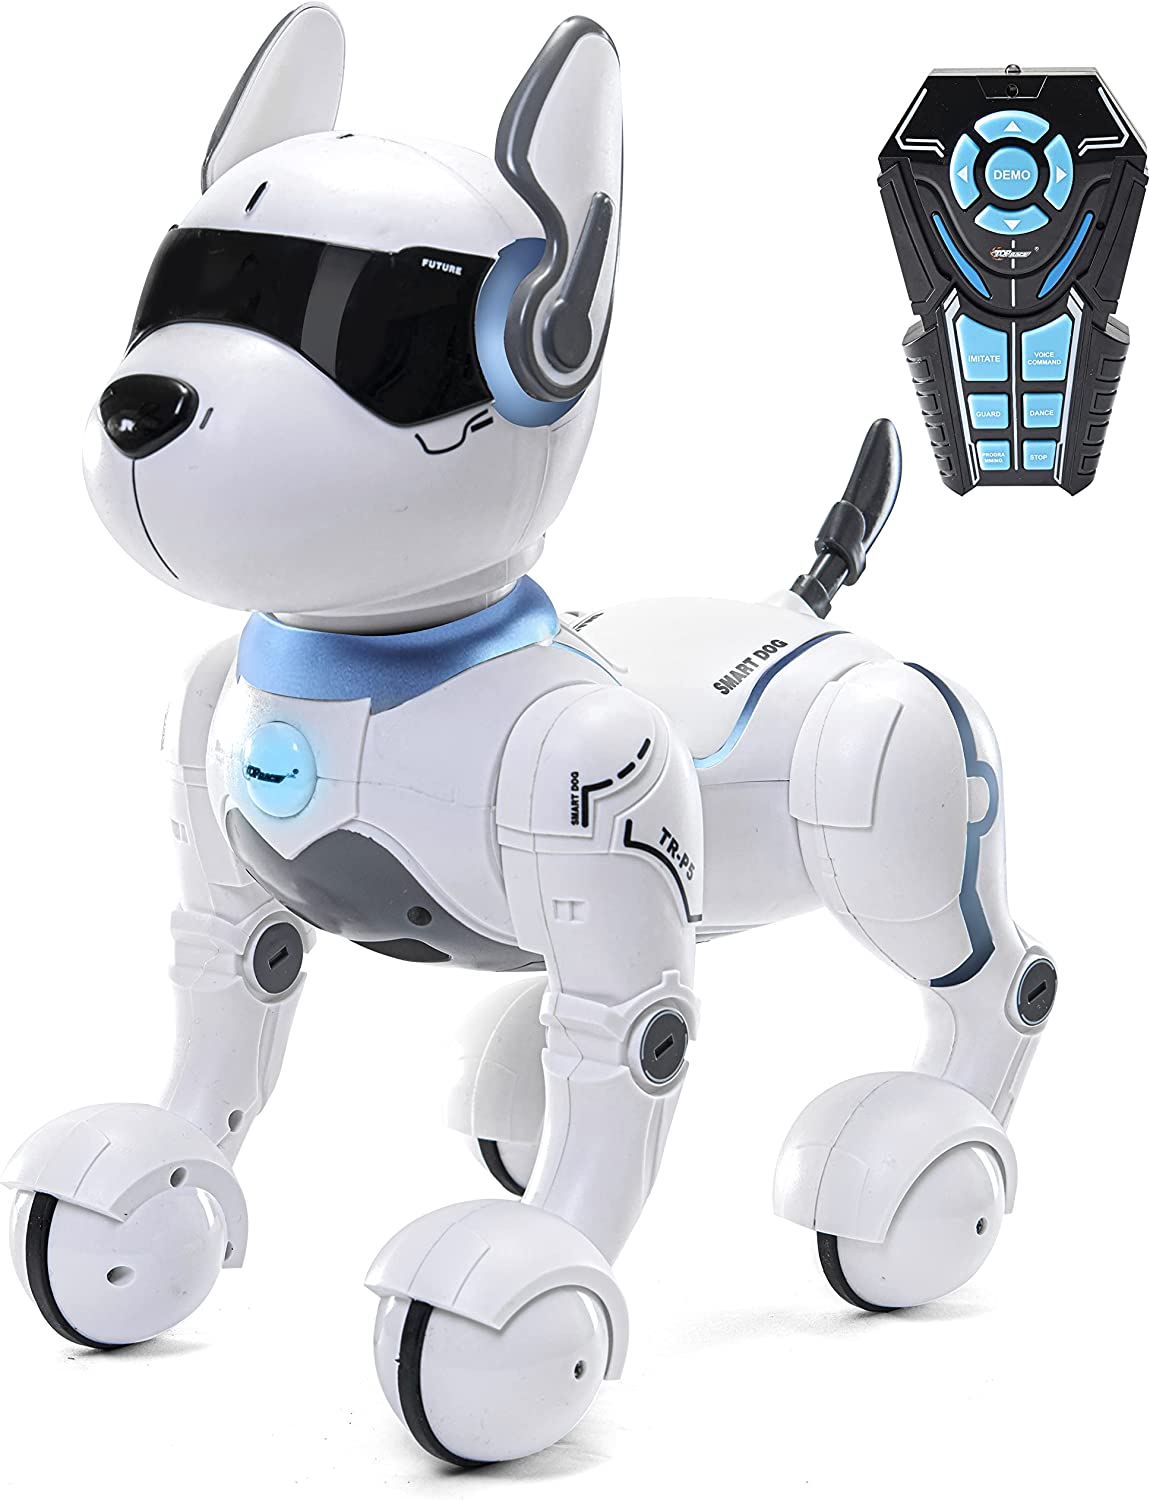 RC Remote Control Robot Dog Toys with Touch Function and Voice Control Smart and Dancing Imitates Animals Mini Pet programmable